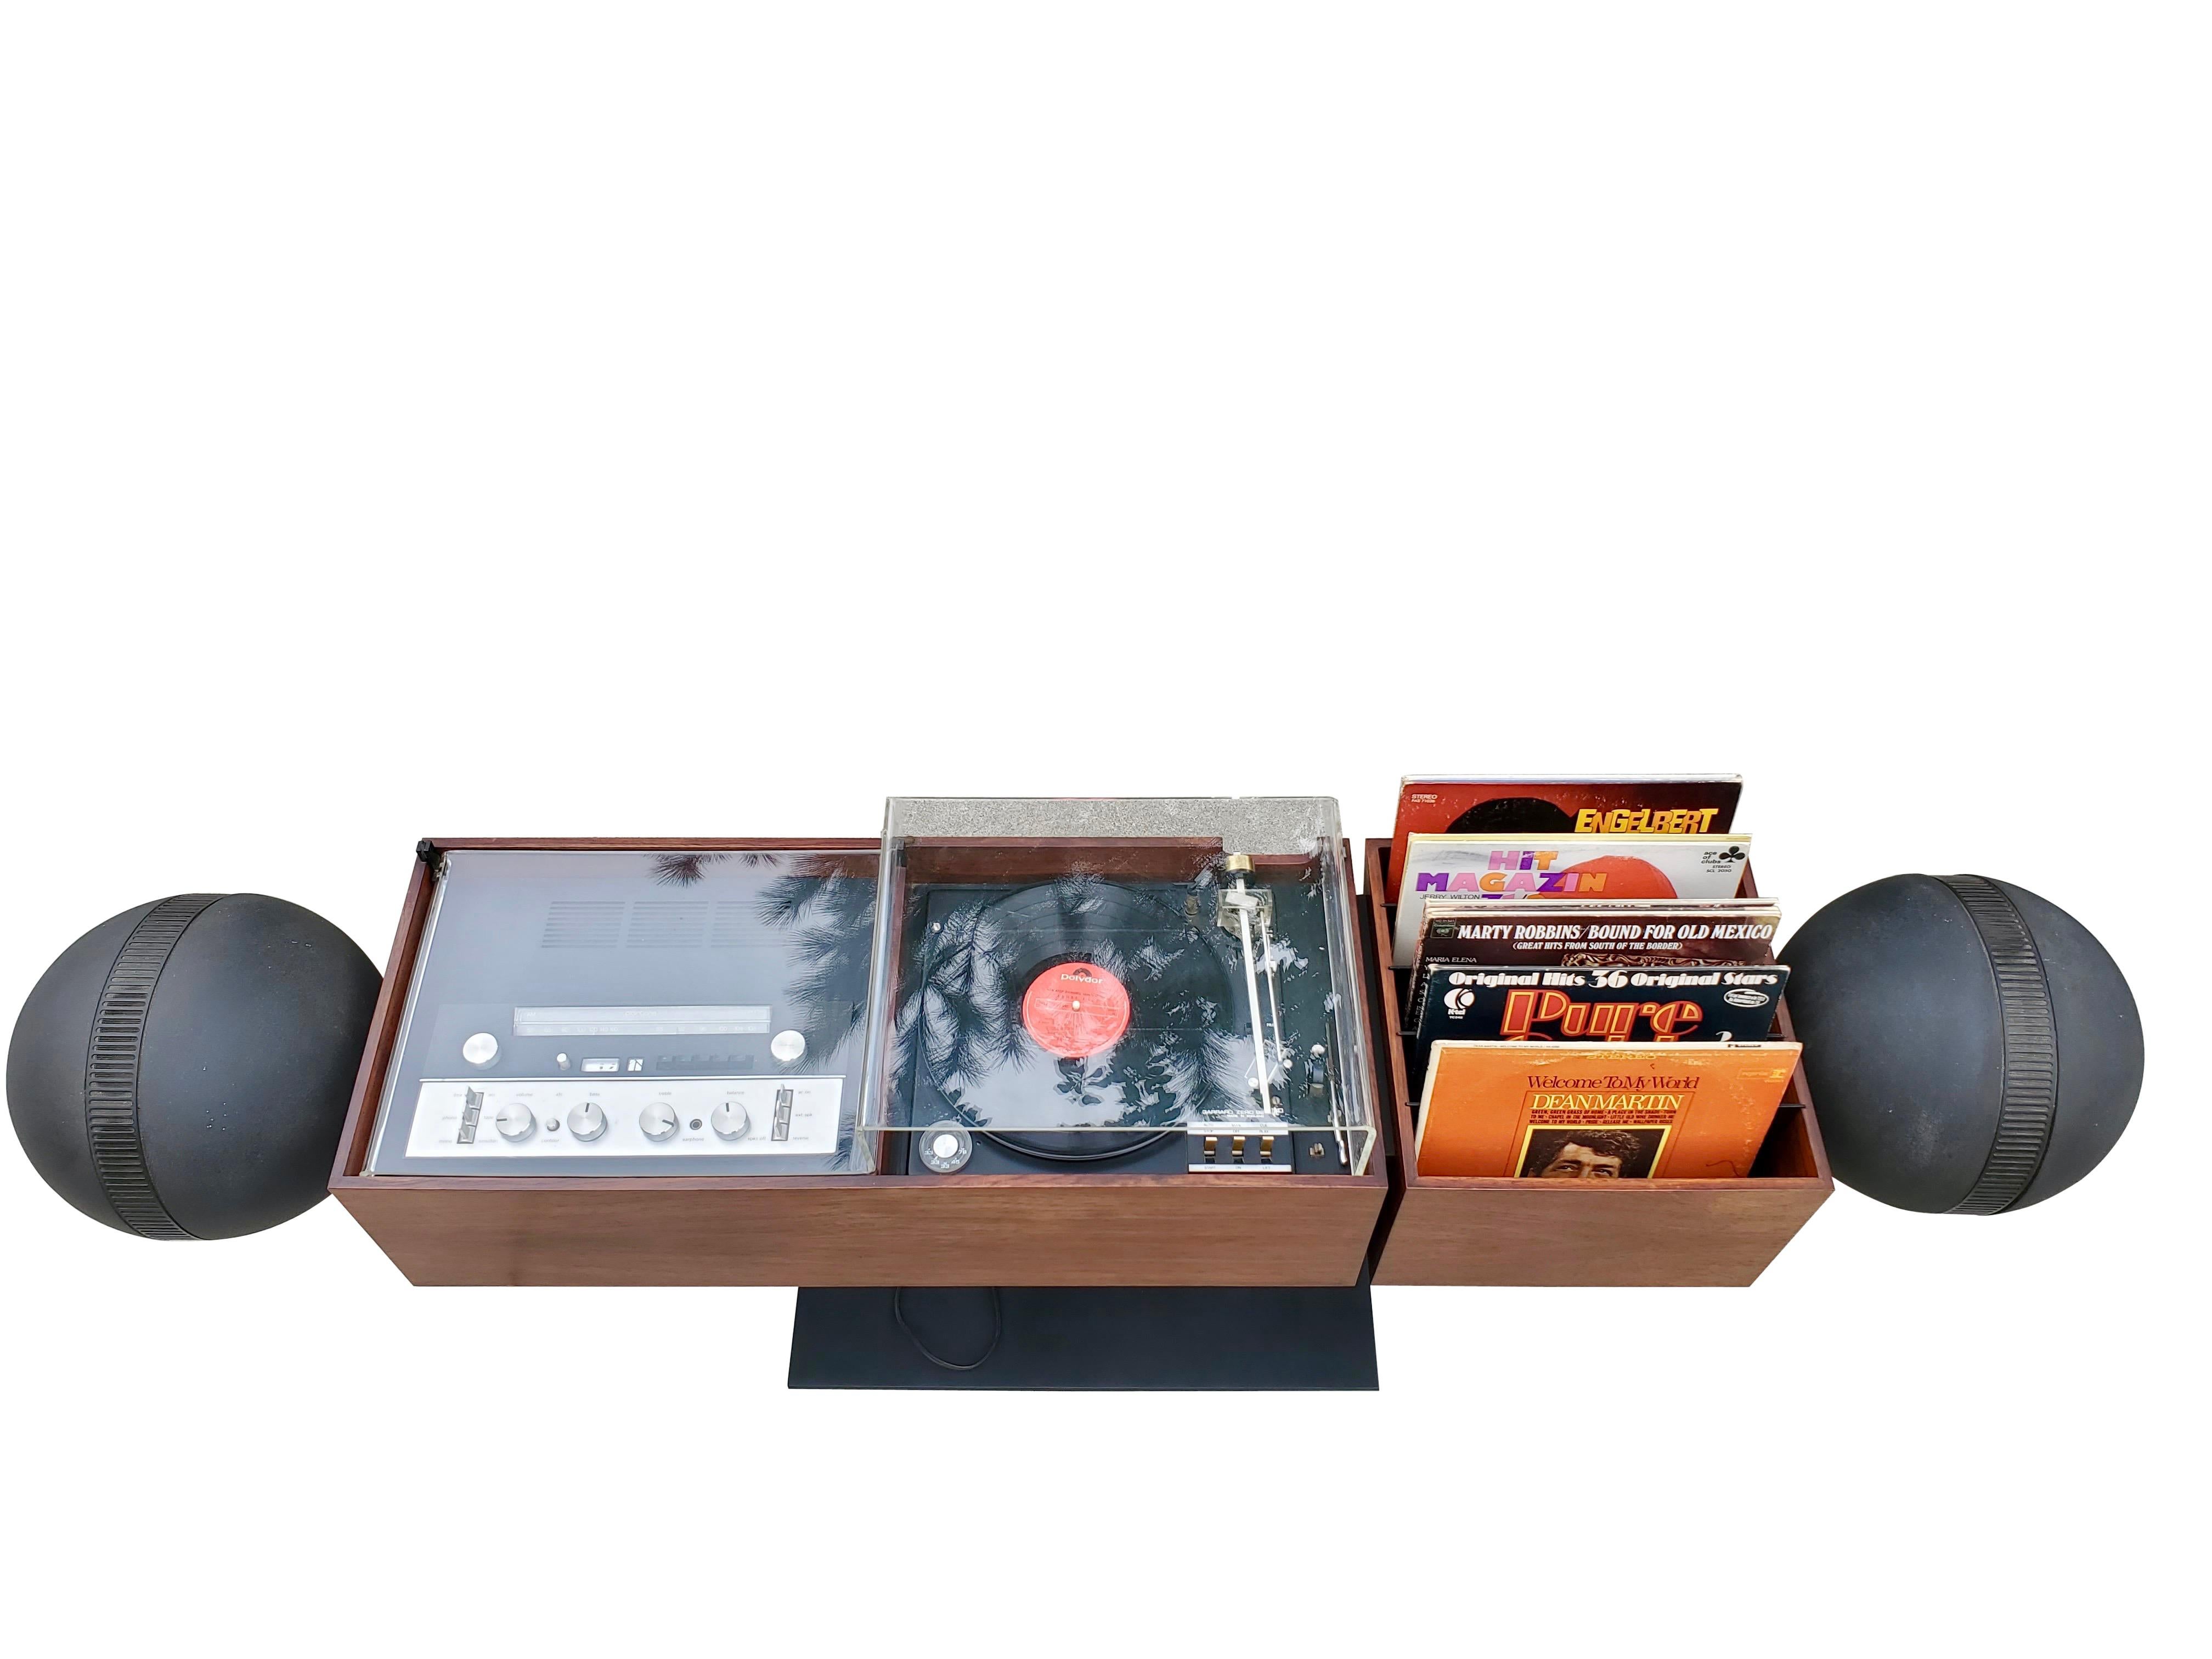 Canadien Clairtone Project G2 Series T11 Console Stereo System & Garrard Turntable en vente